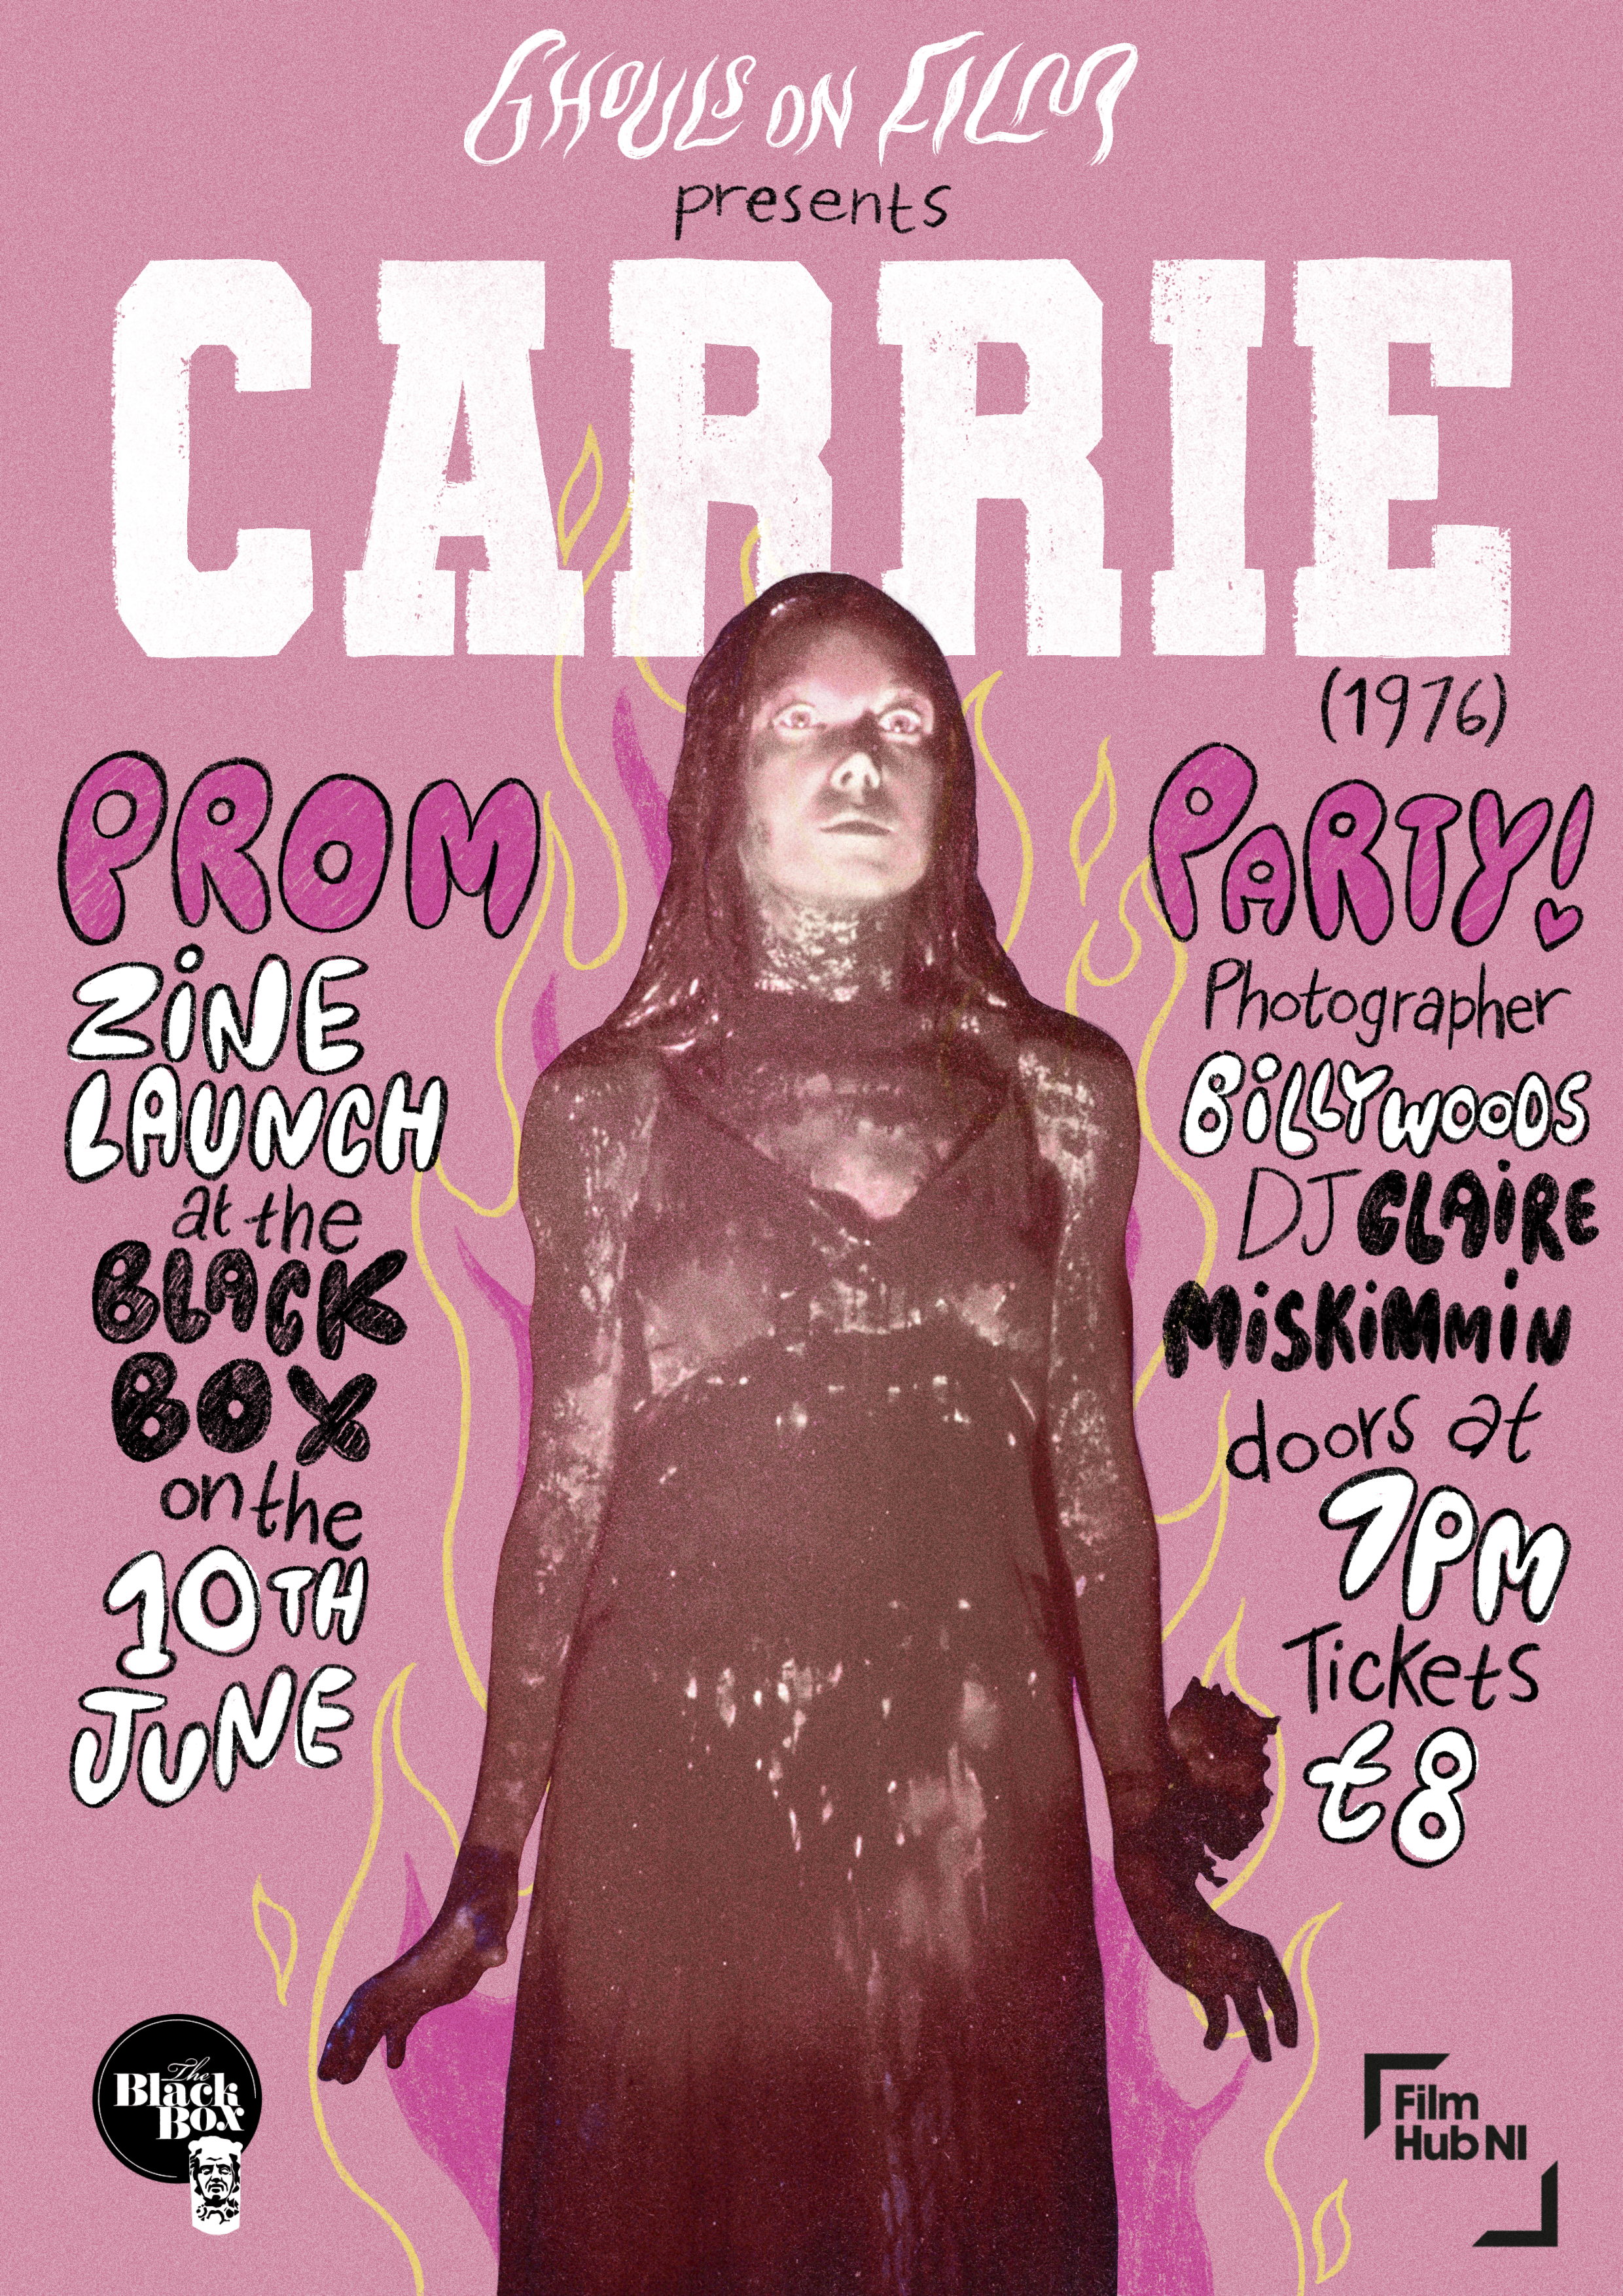 Ghouls On Film presents The Carrie Prom Party!